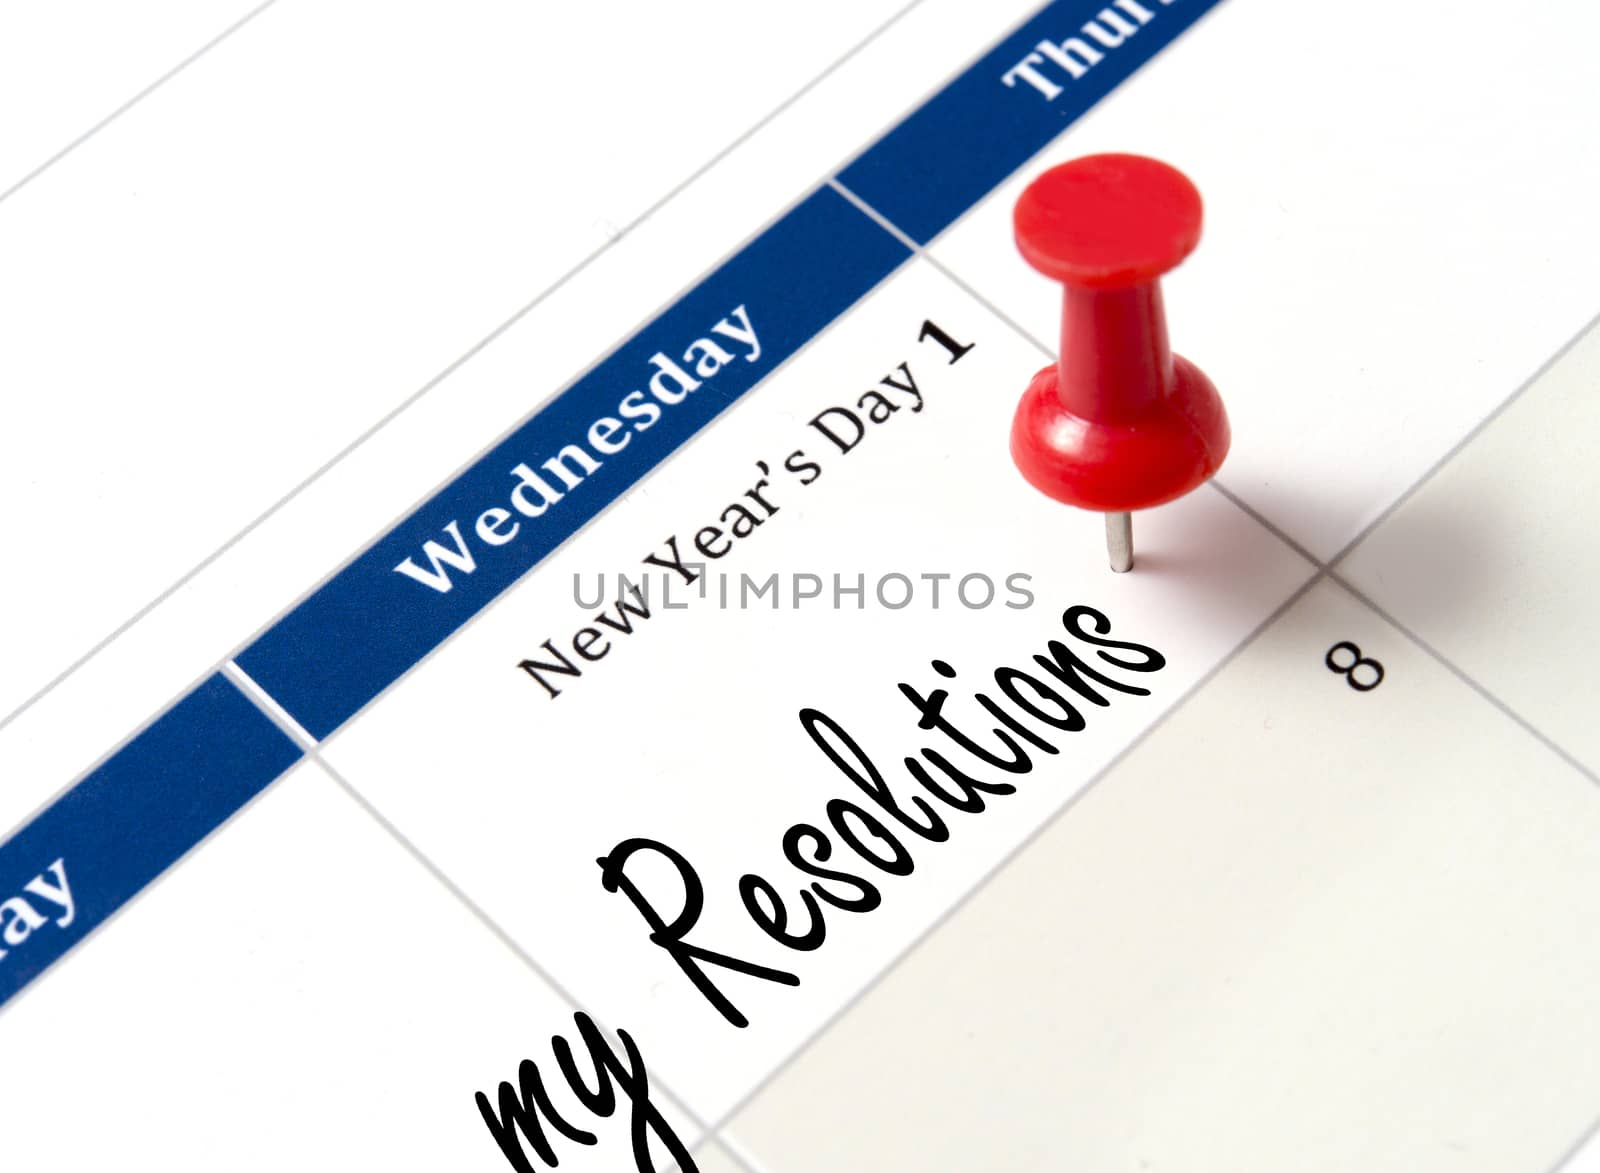 Pin on calendar pointing new year resolutions by ocusfocus